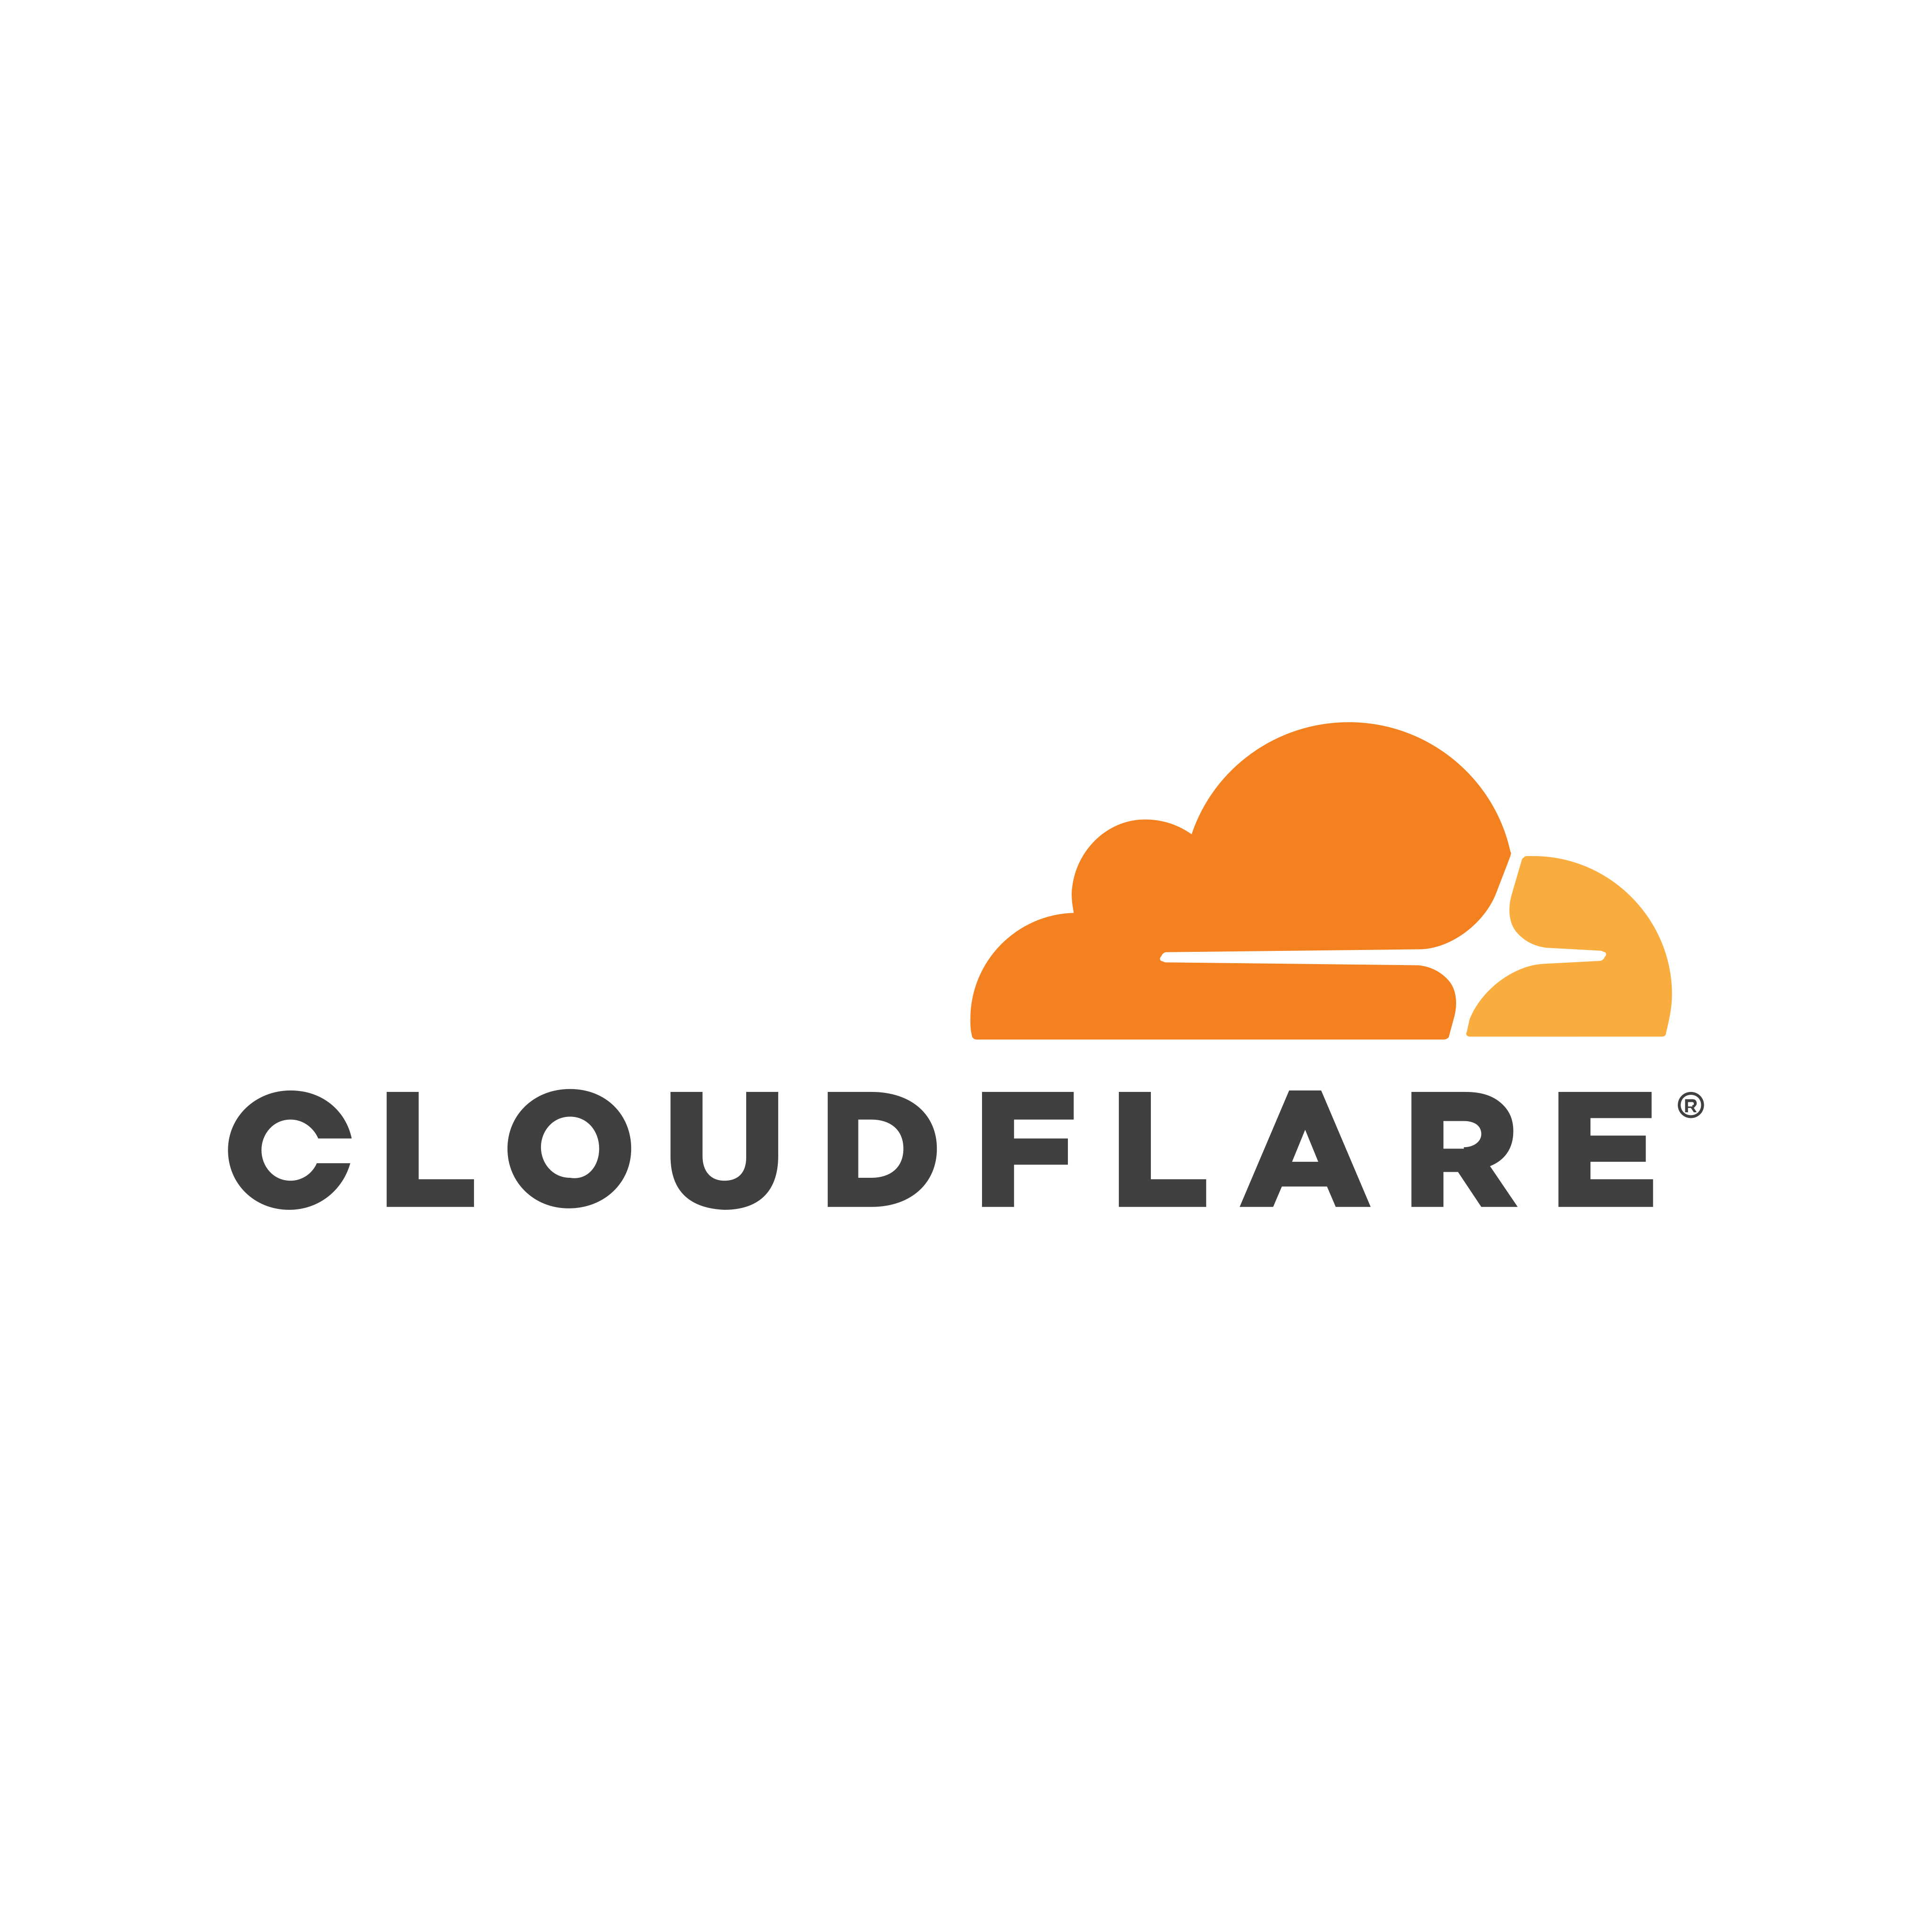 Cloudflare Logo PNG.